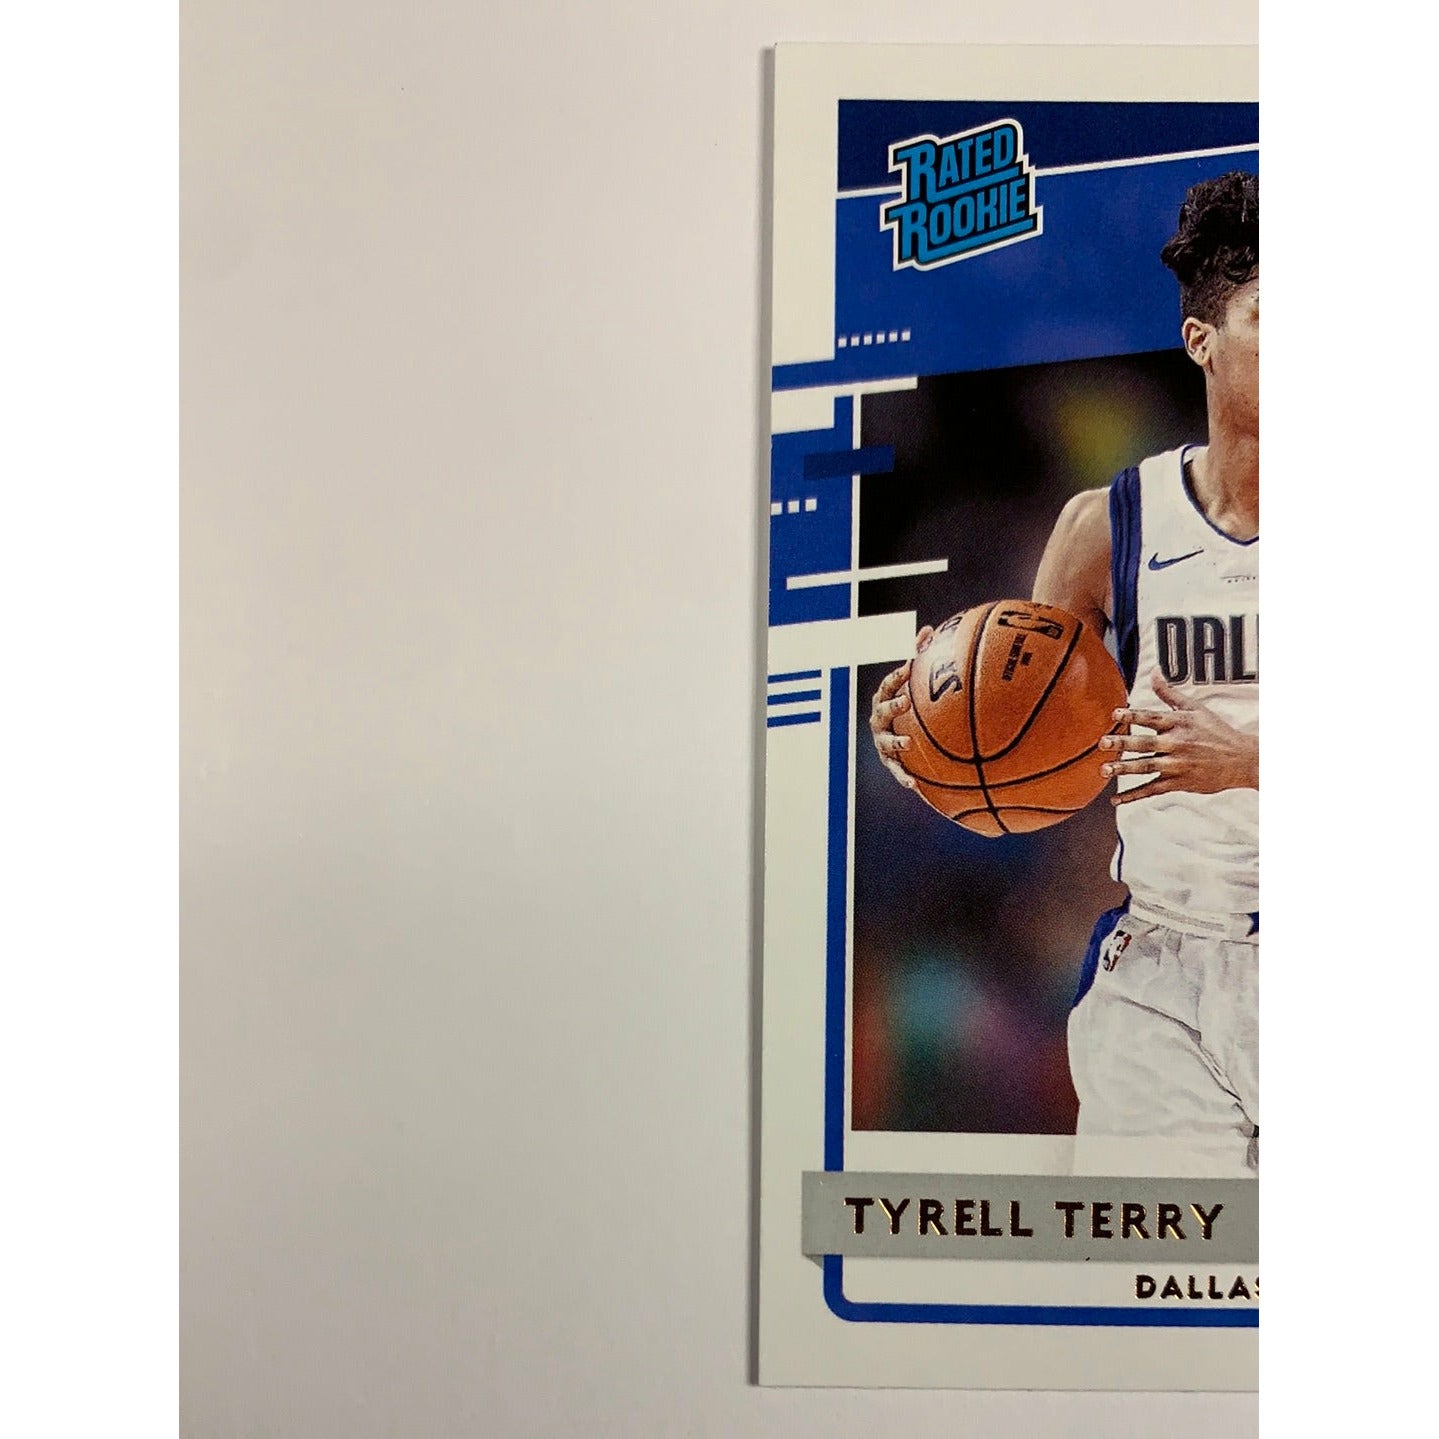 2020-21 Donruss Tyrell Terry Rated Rookie